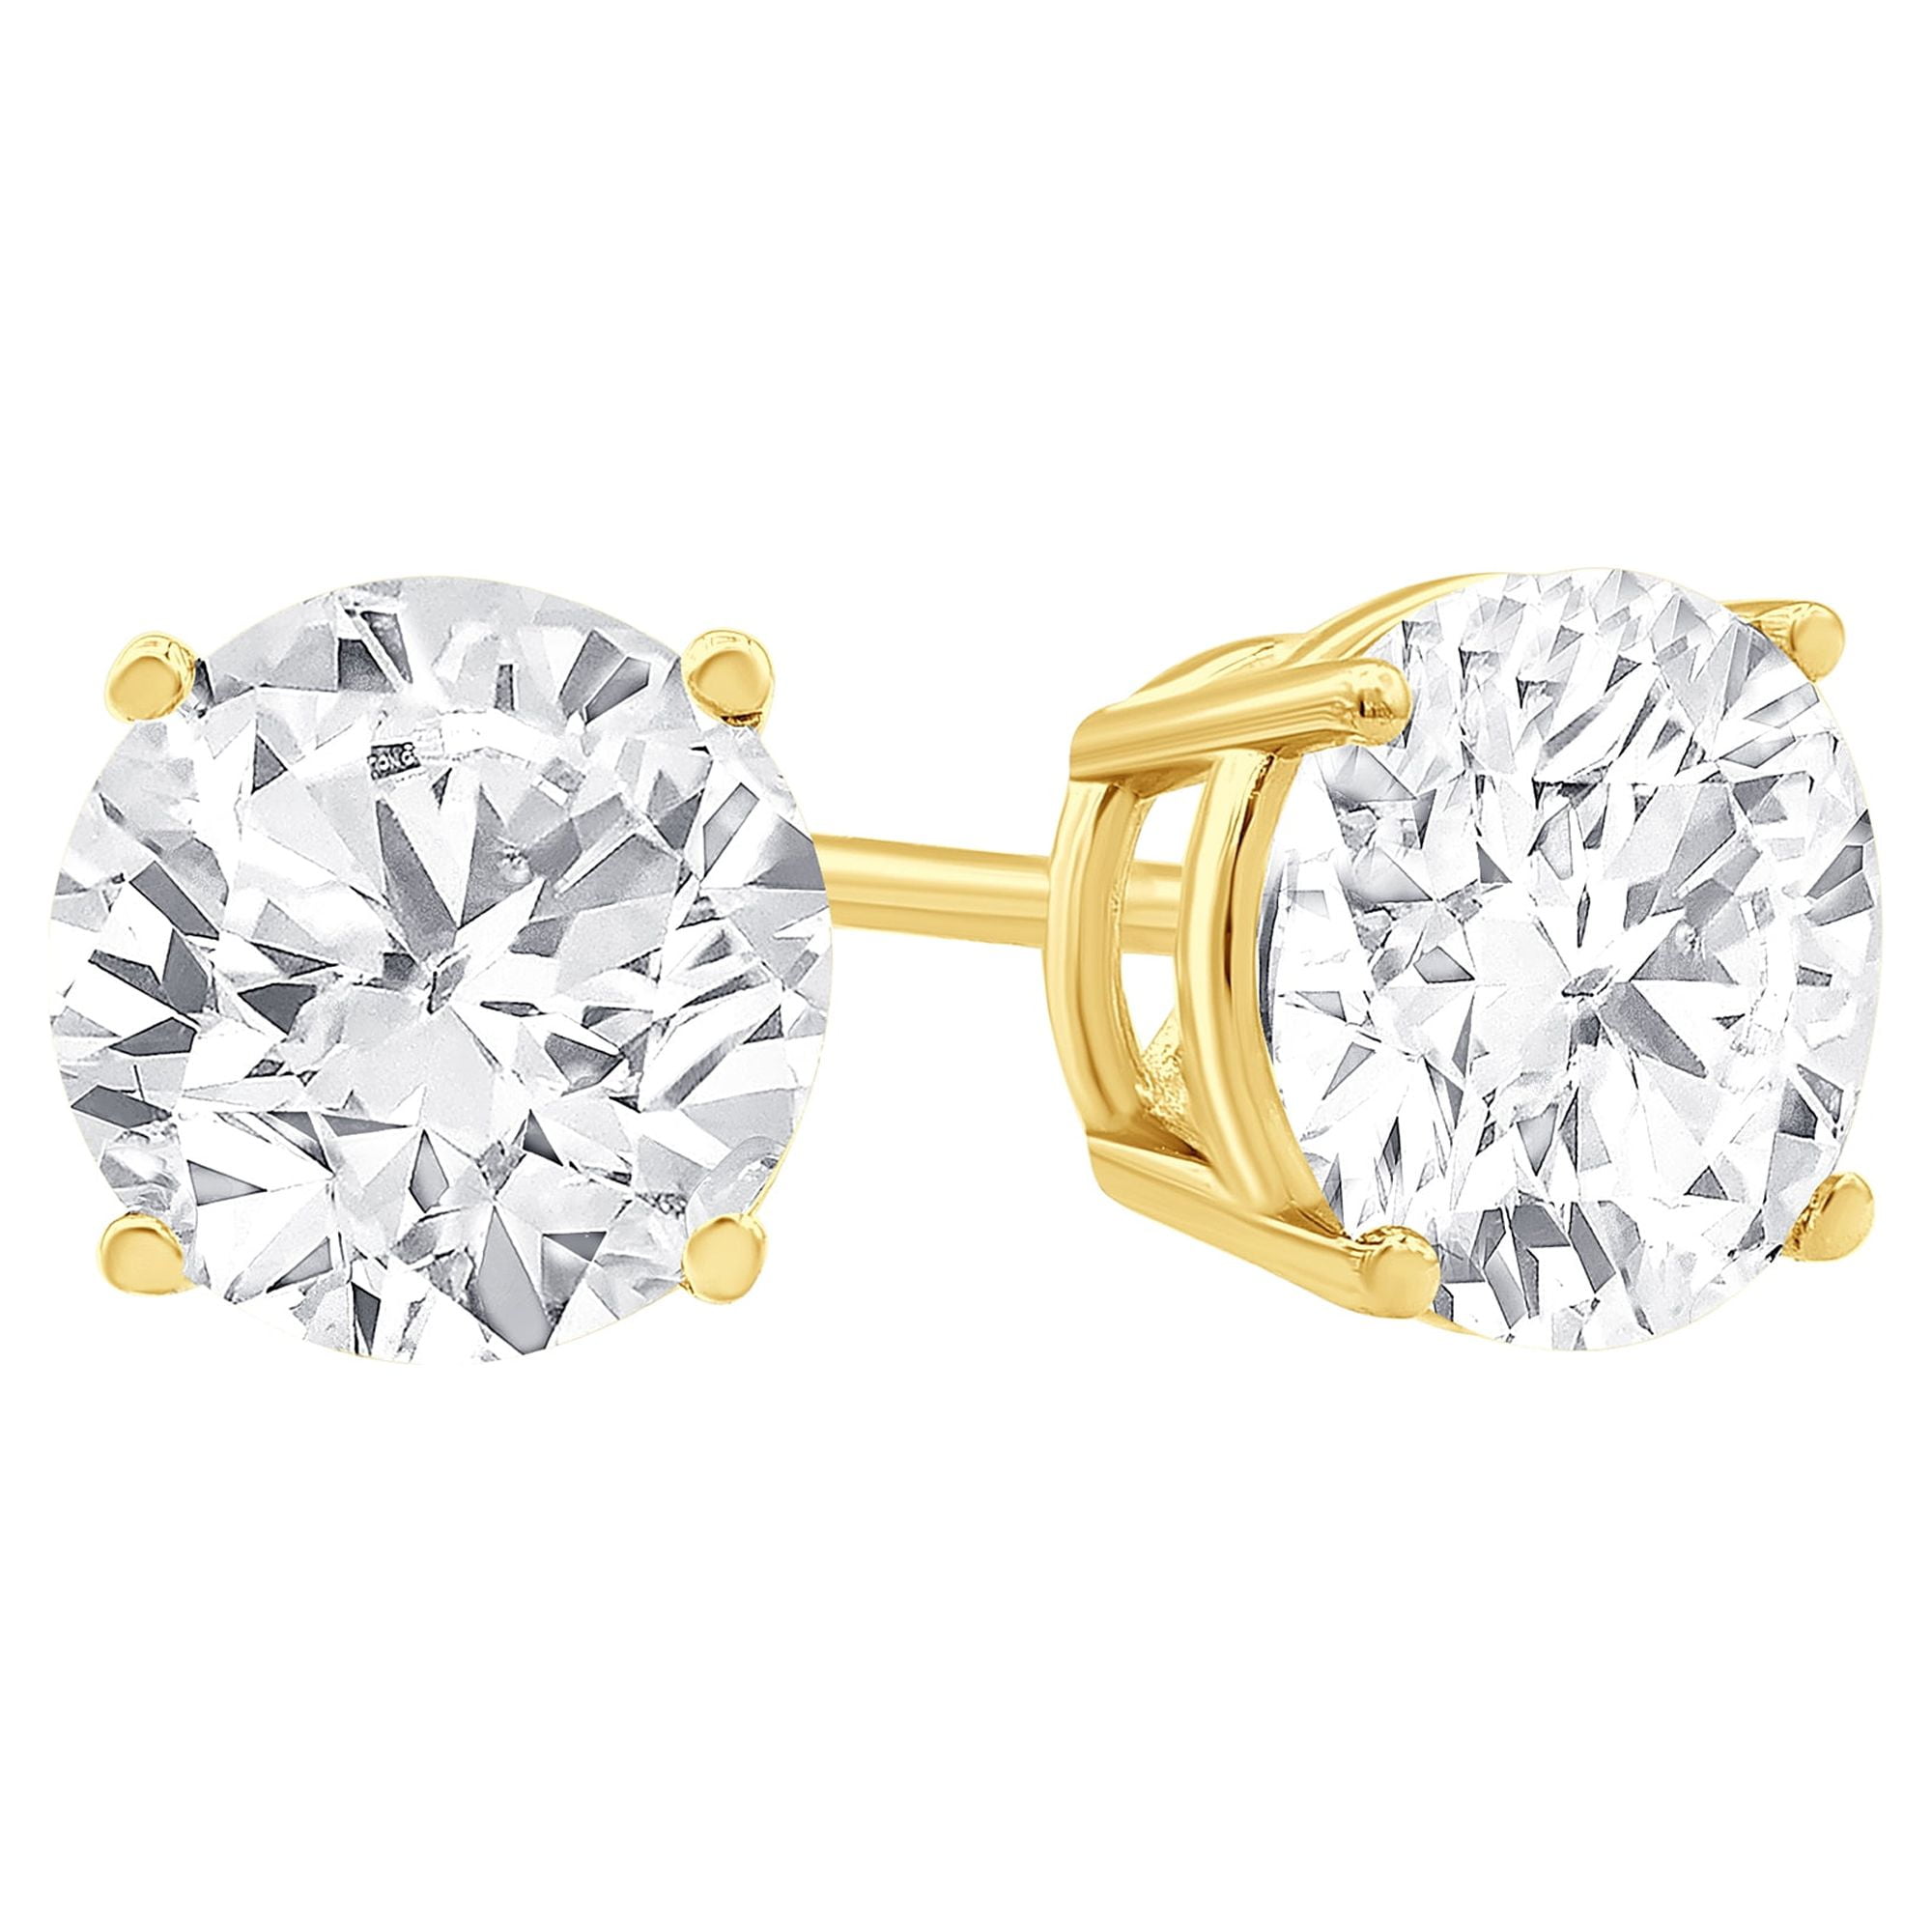 Buy 1gram gold Ring type earring stud for girl and women for old treditioal  design at Amazon.in